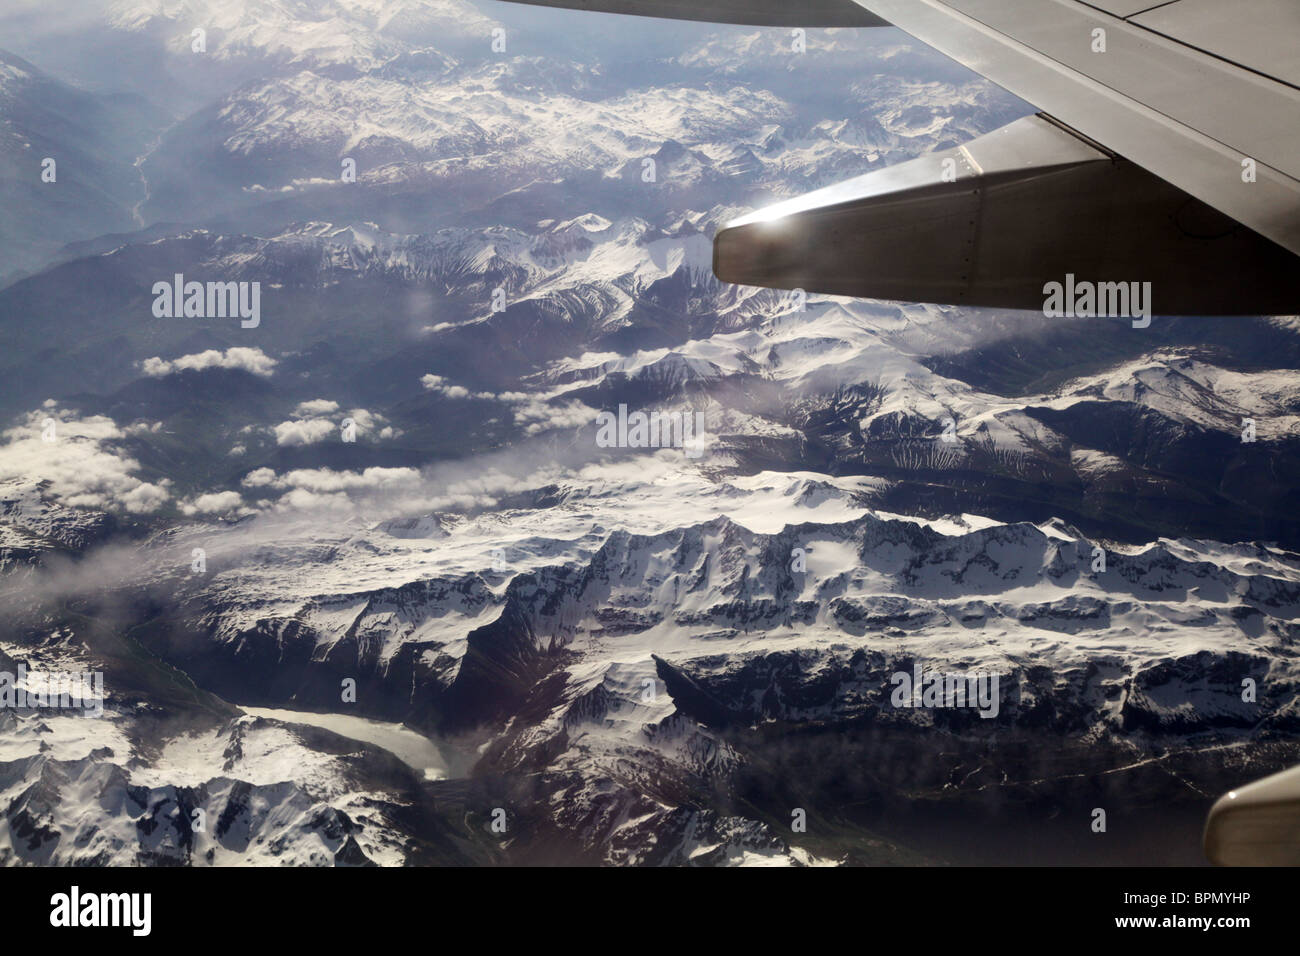 A view of the snow-covered peaks of the European Alps in France from a passenger aeroplane Stock Photo